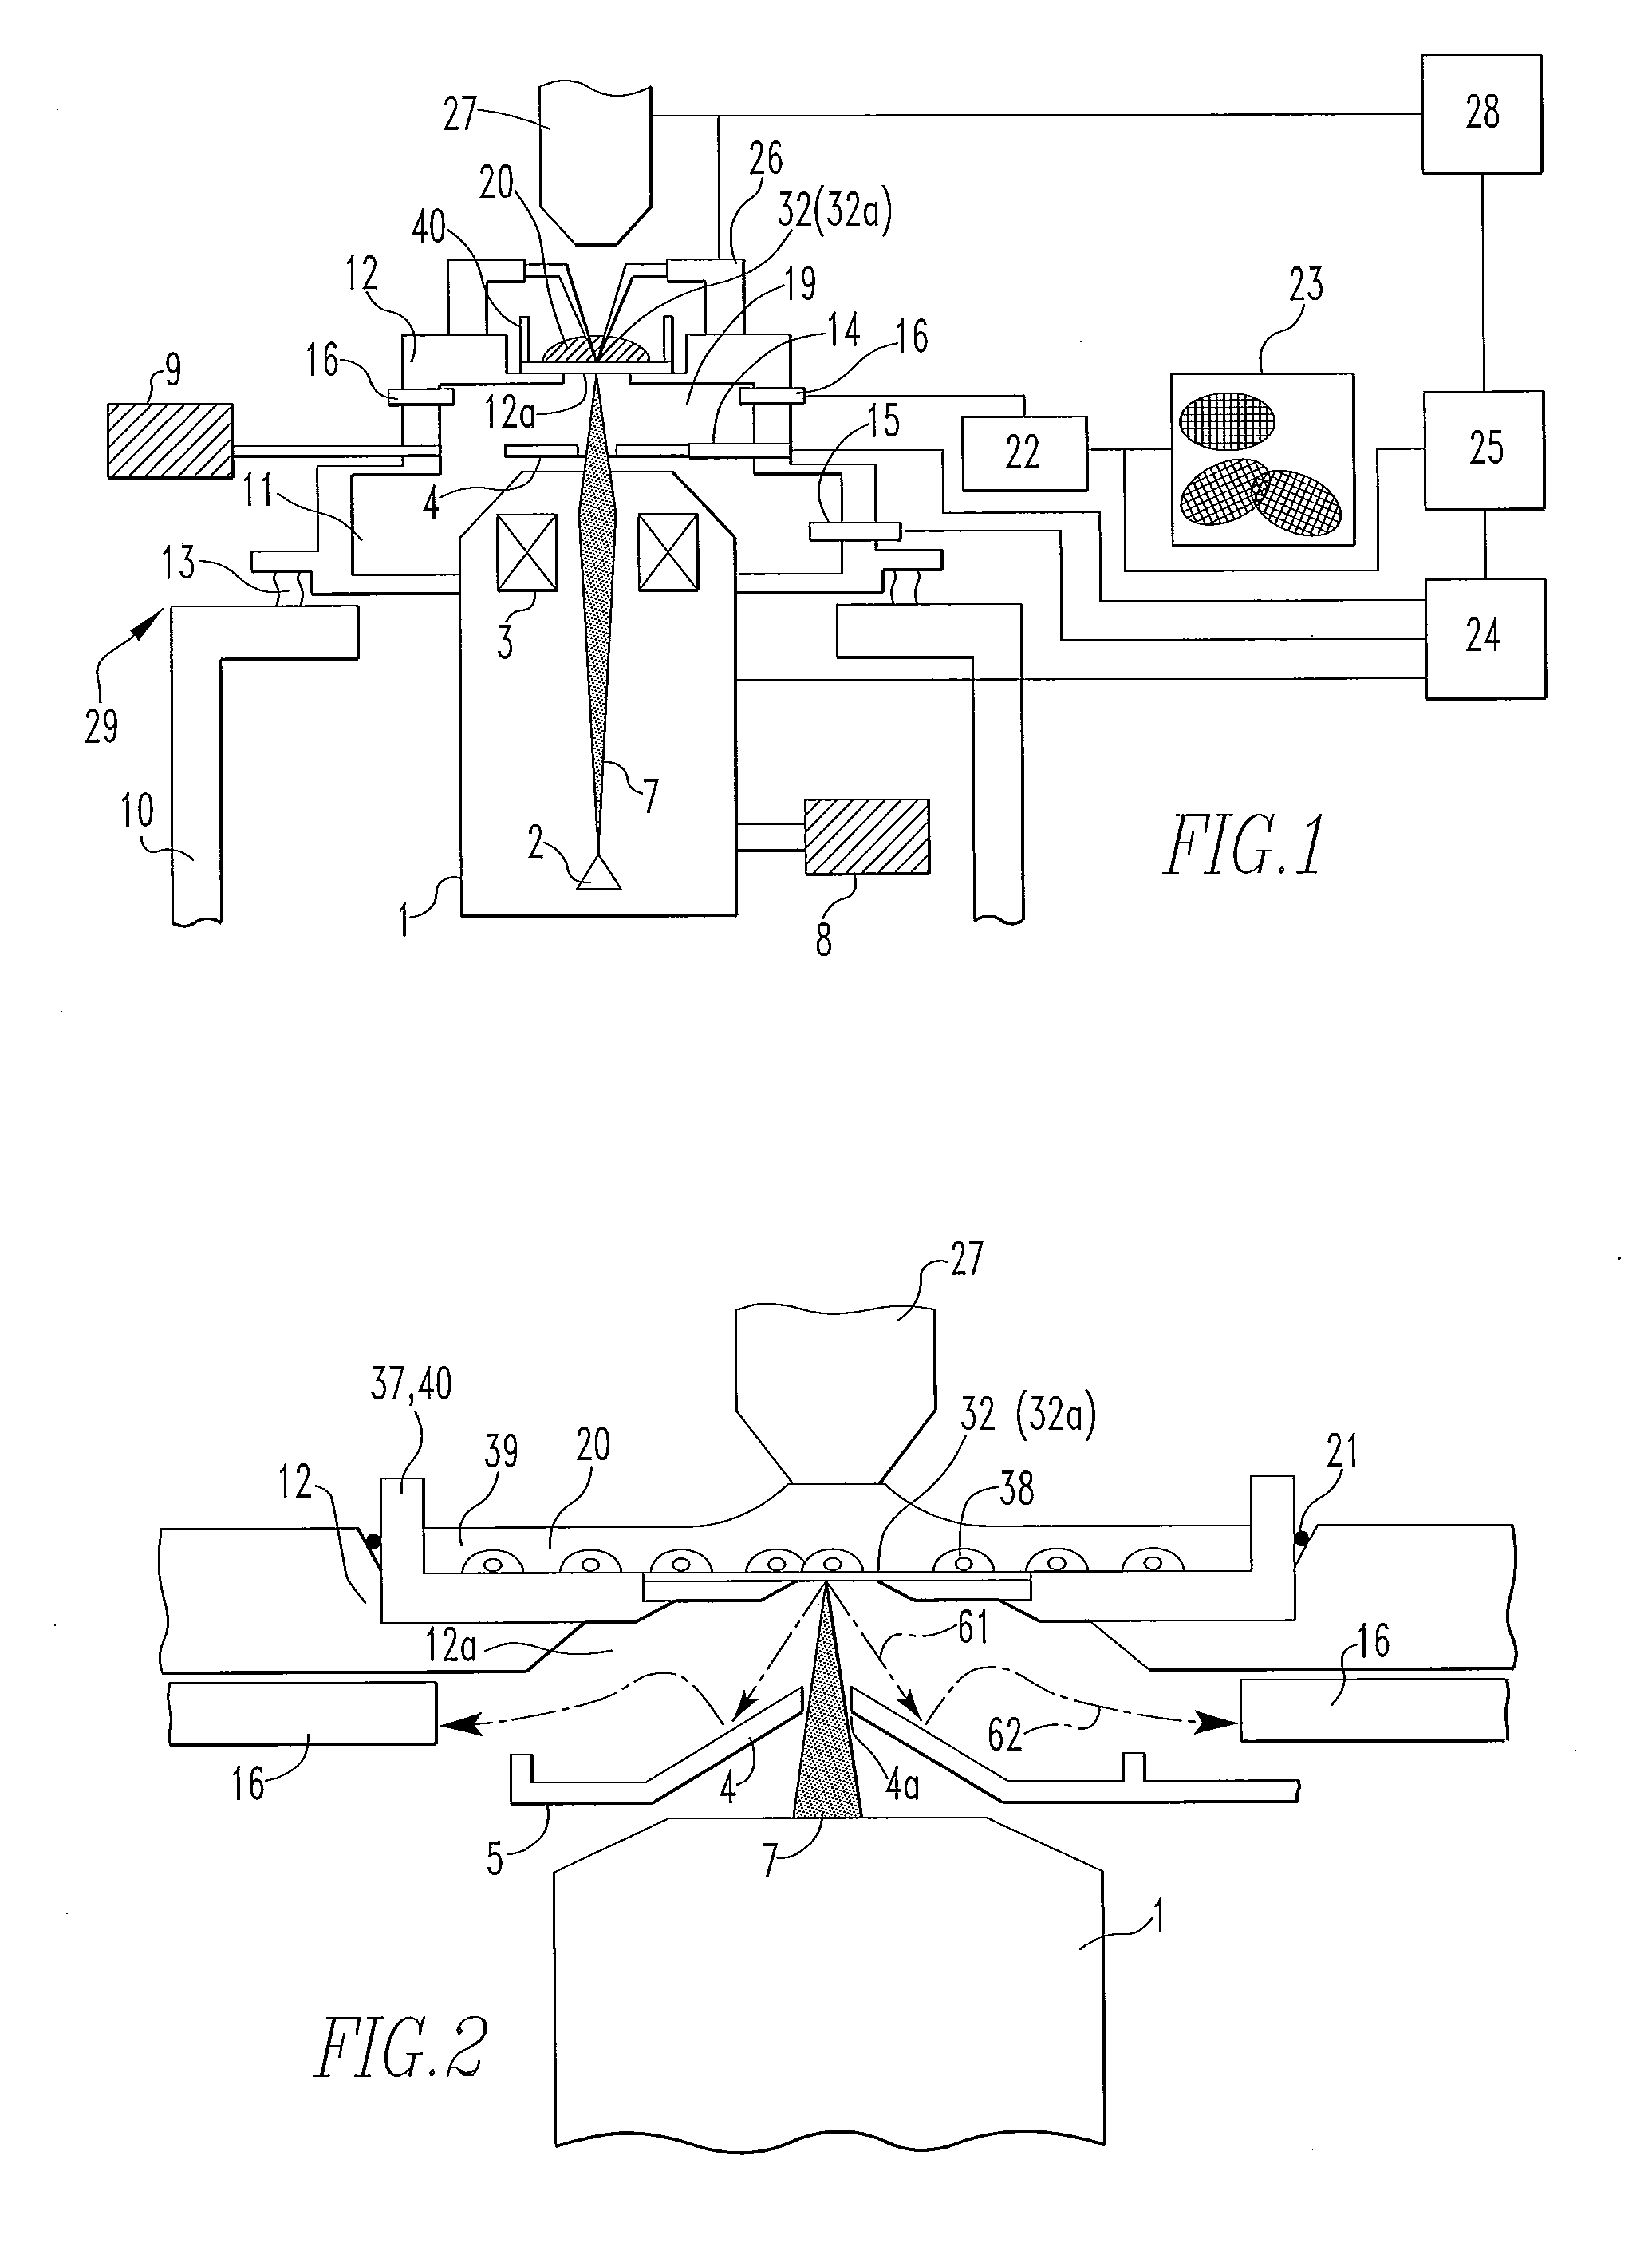 Apparatus and Method for Inspecting Samples